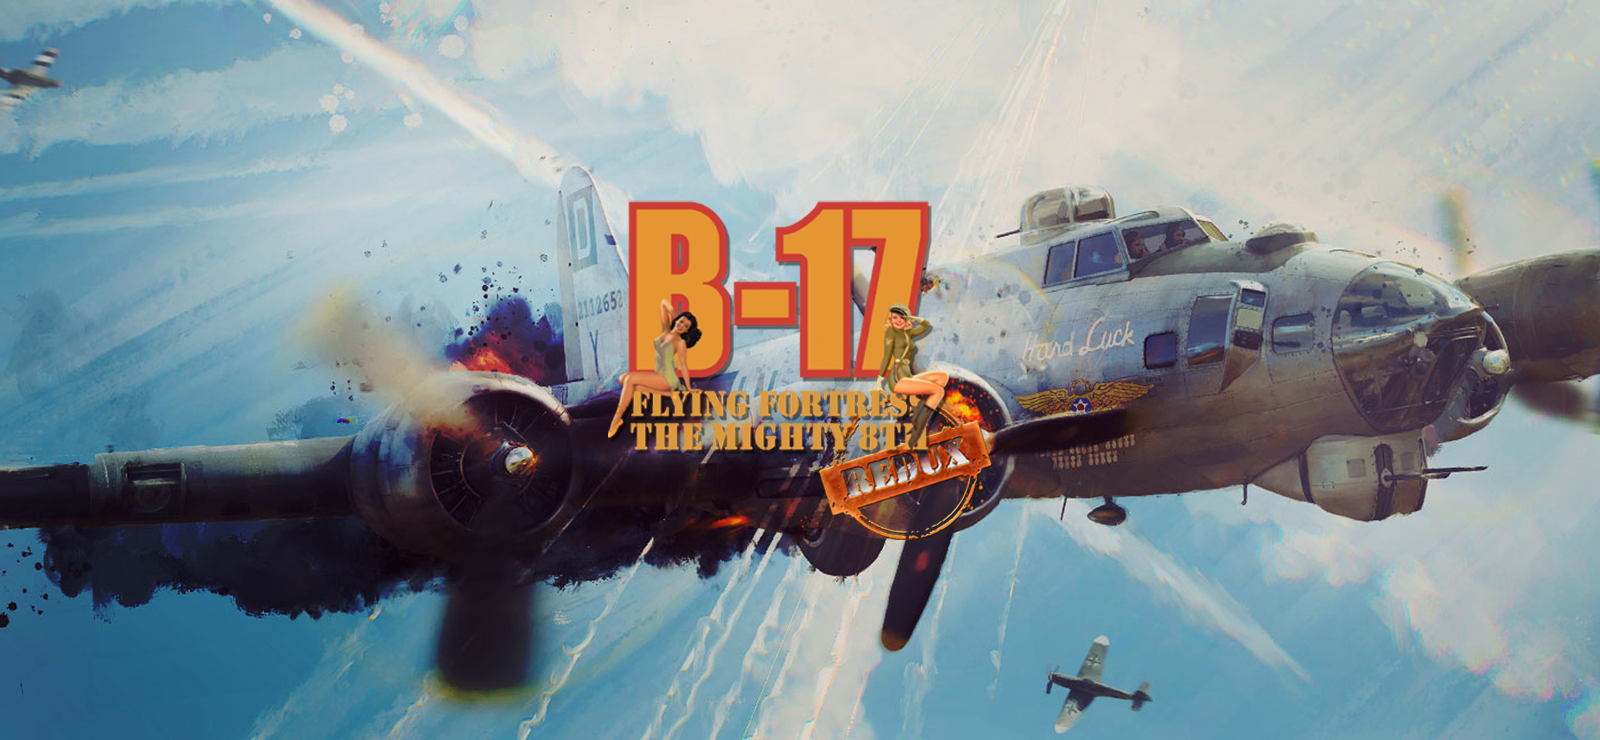 B-17 Flying Fortress The Mighty 8th Redux